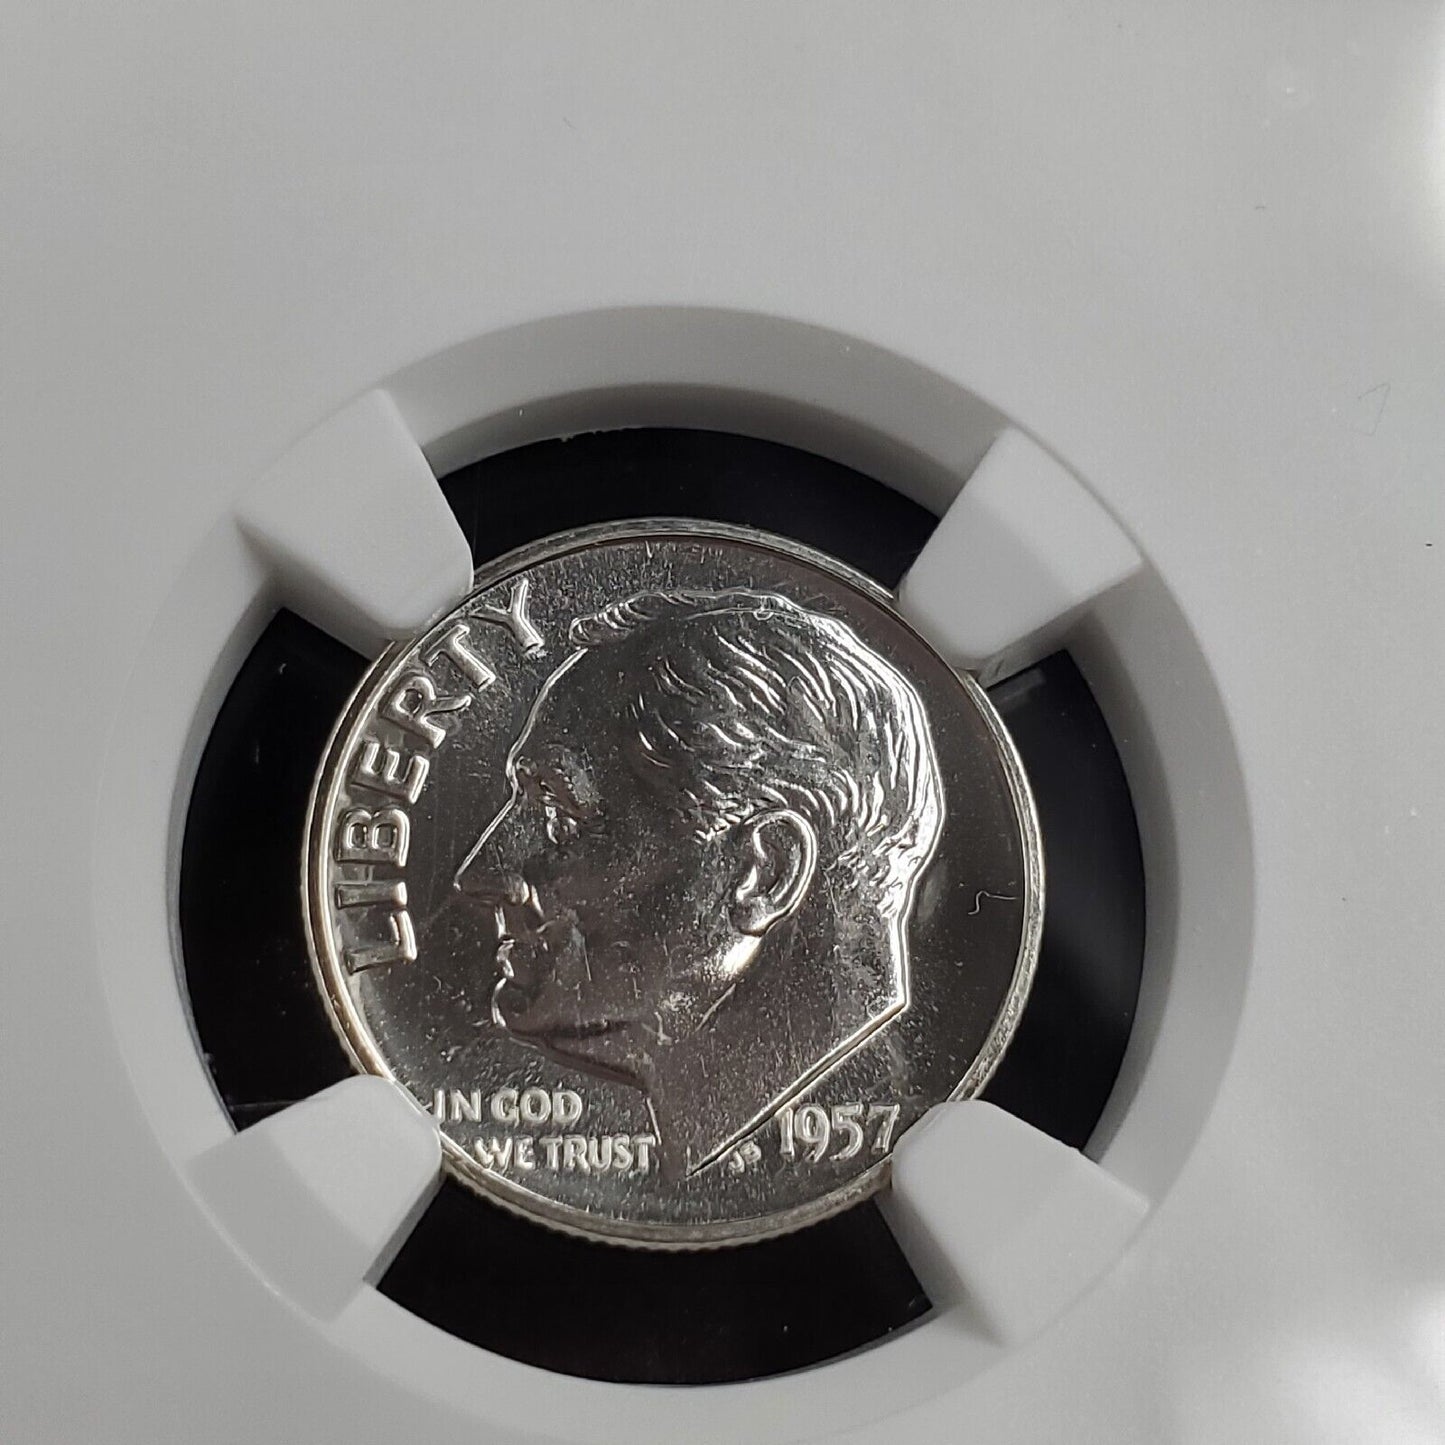 1957 P Roosevelt Silver Dime Coin PF68 NGC Gem Proof Certified